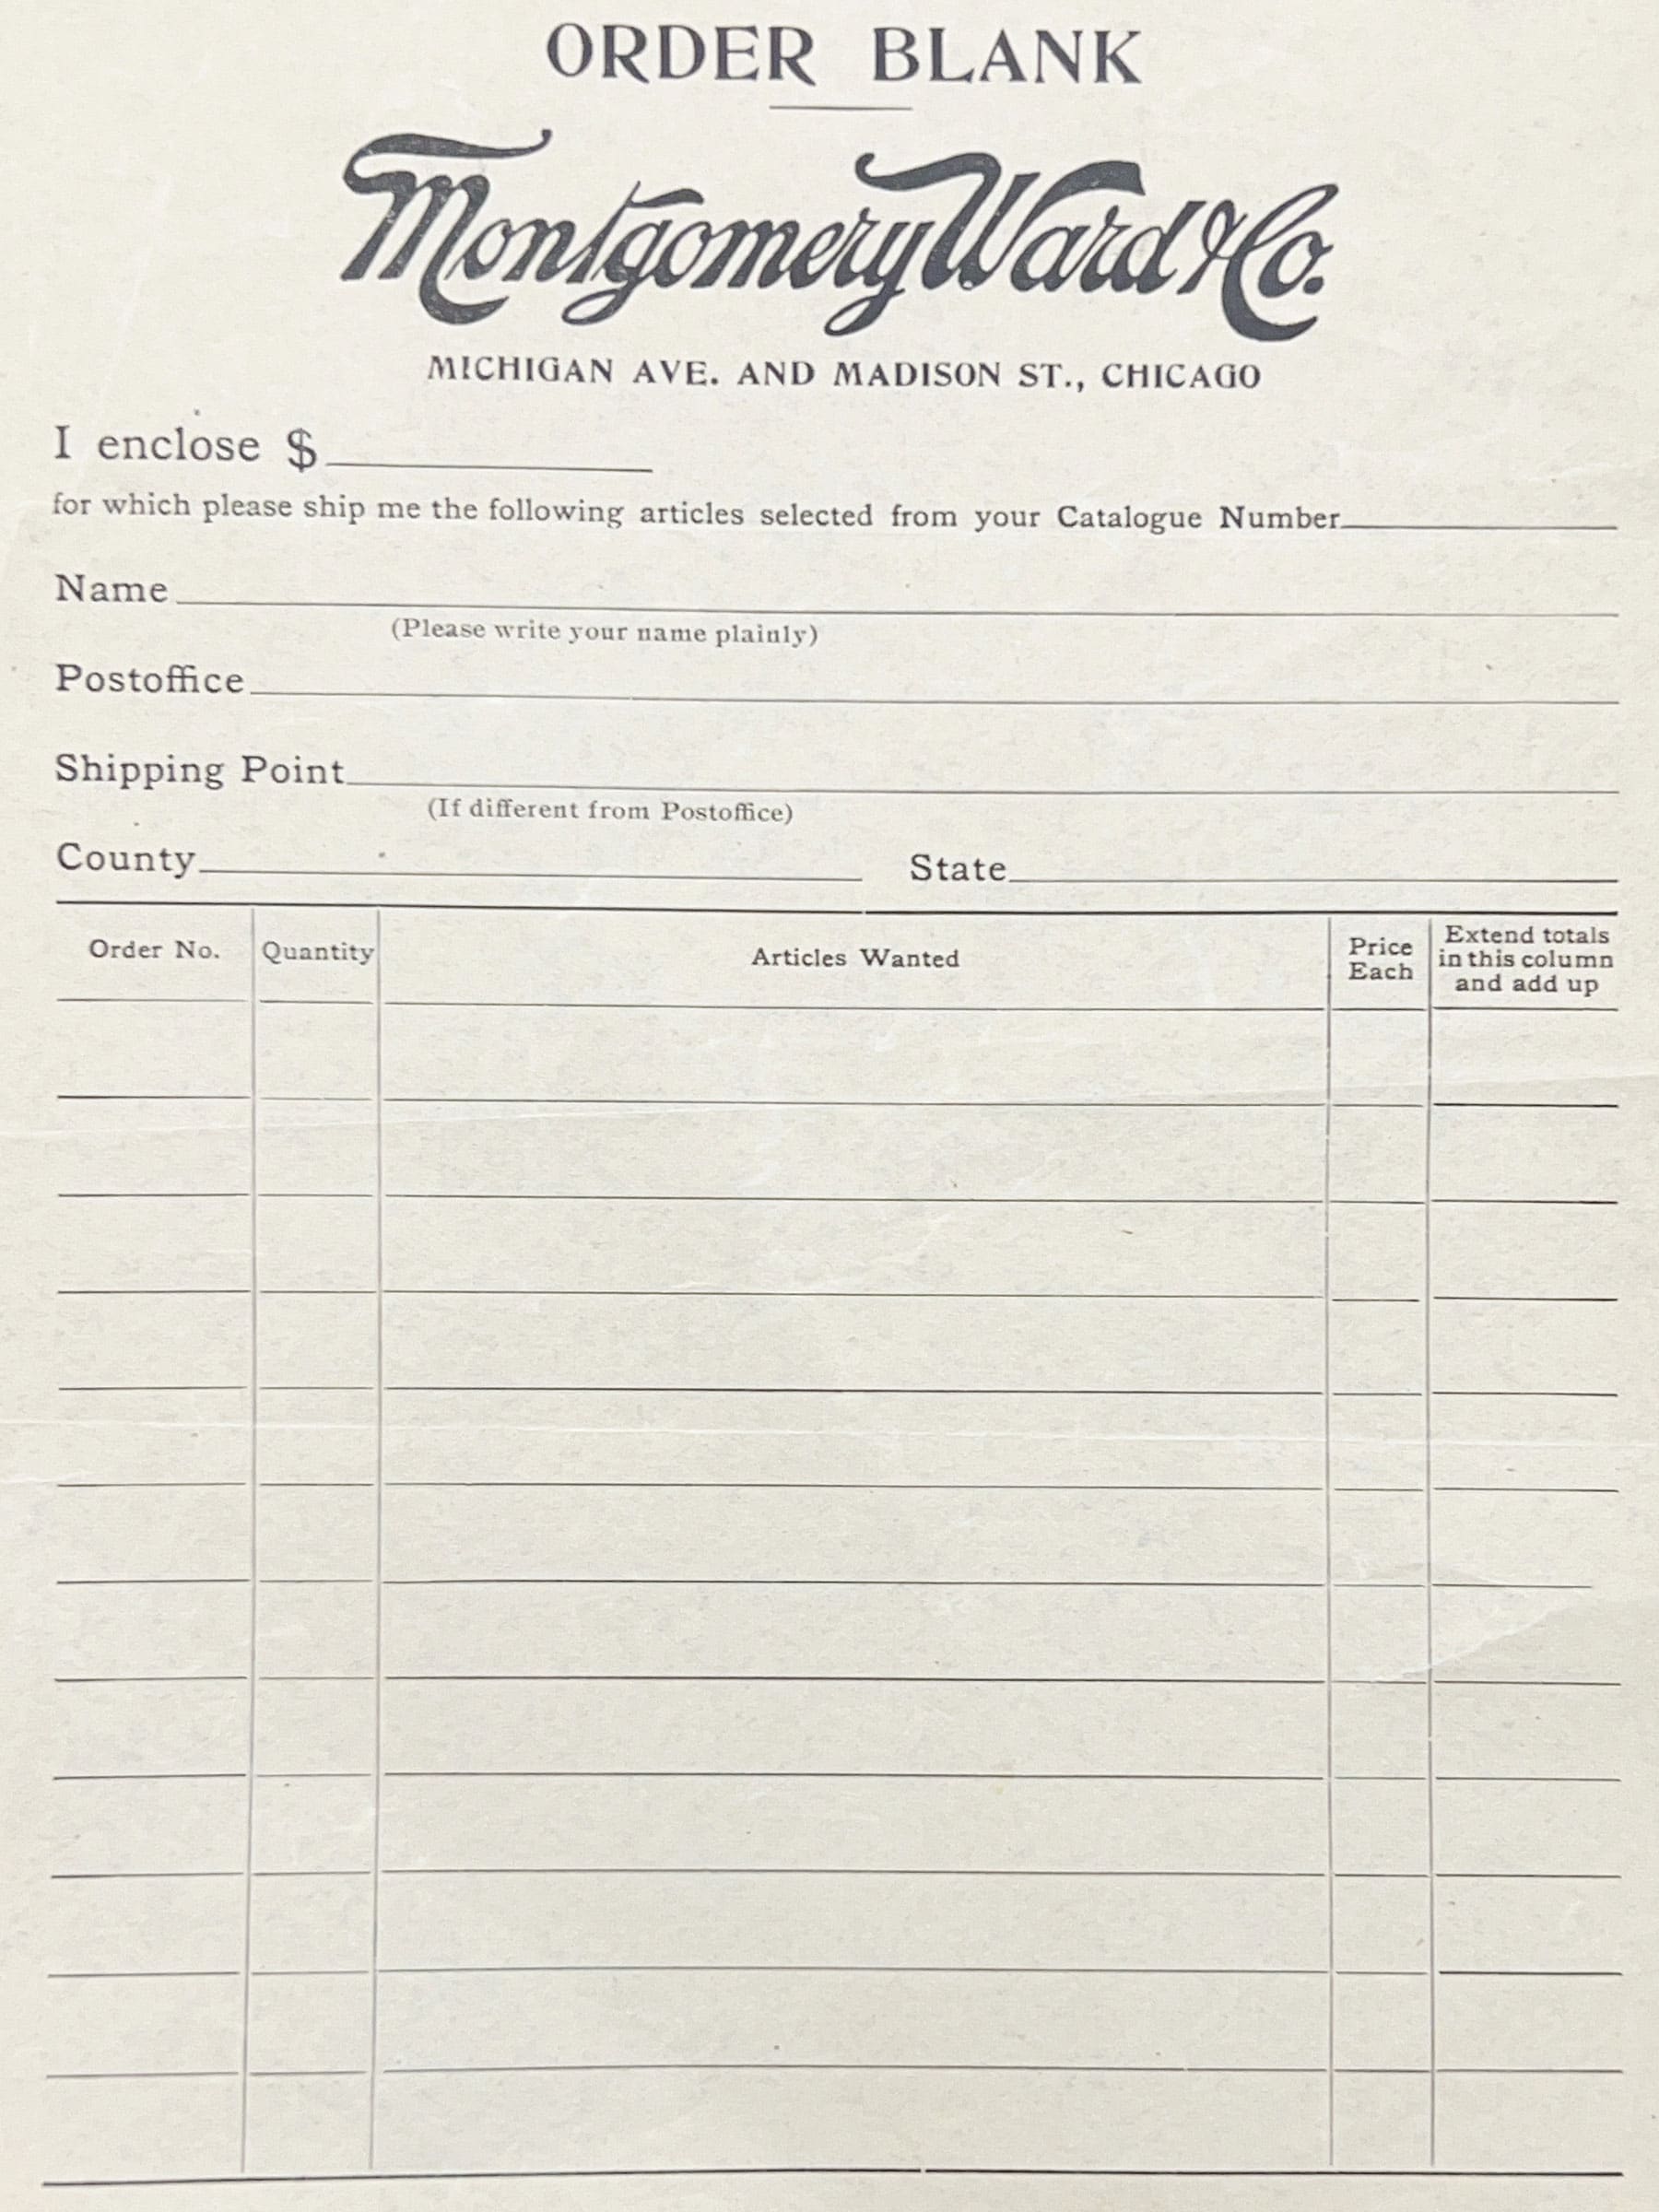 A blank order form from the 1890s